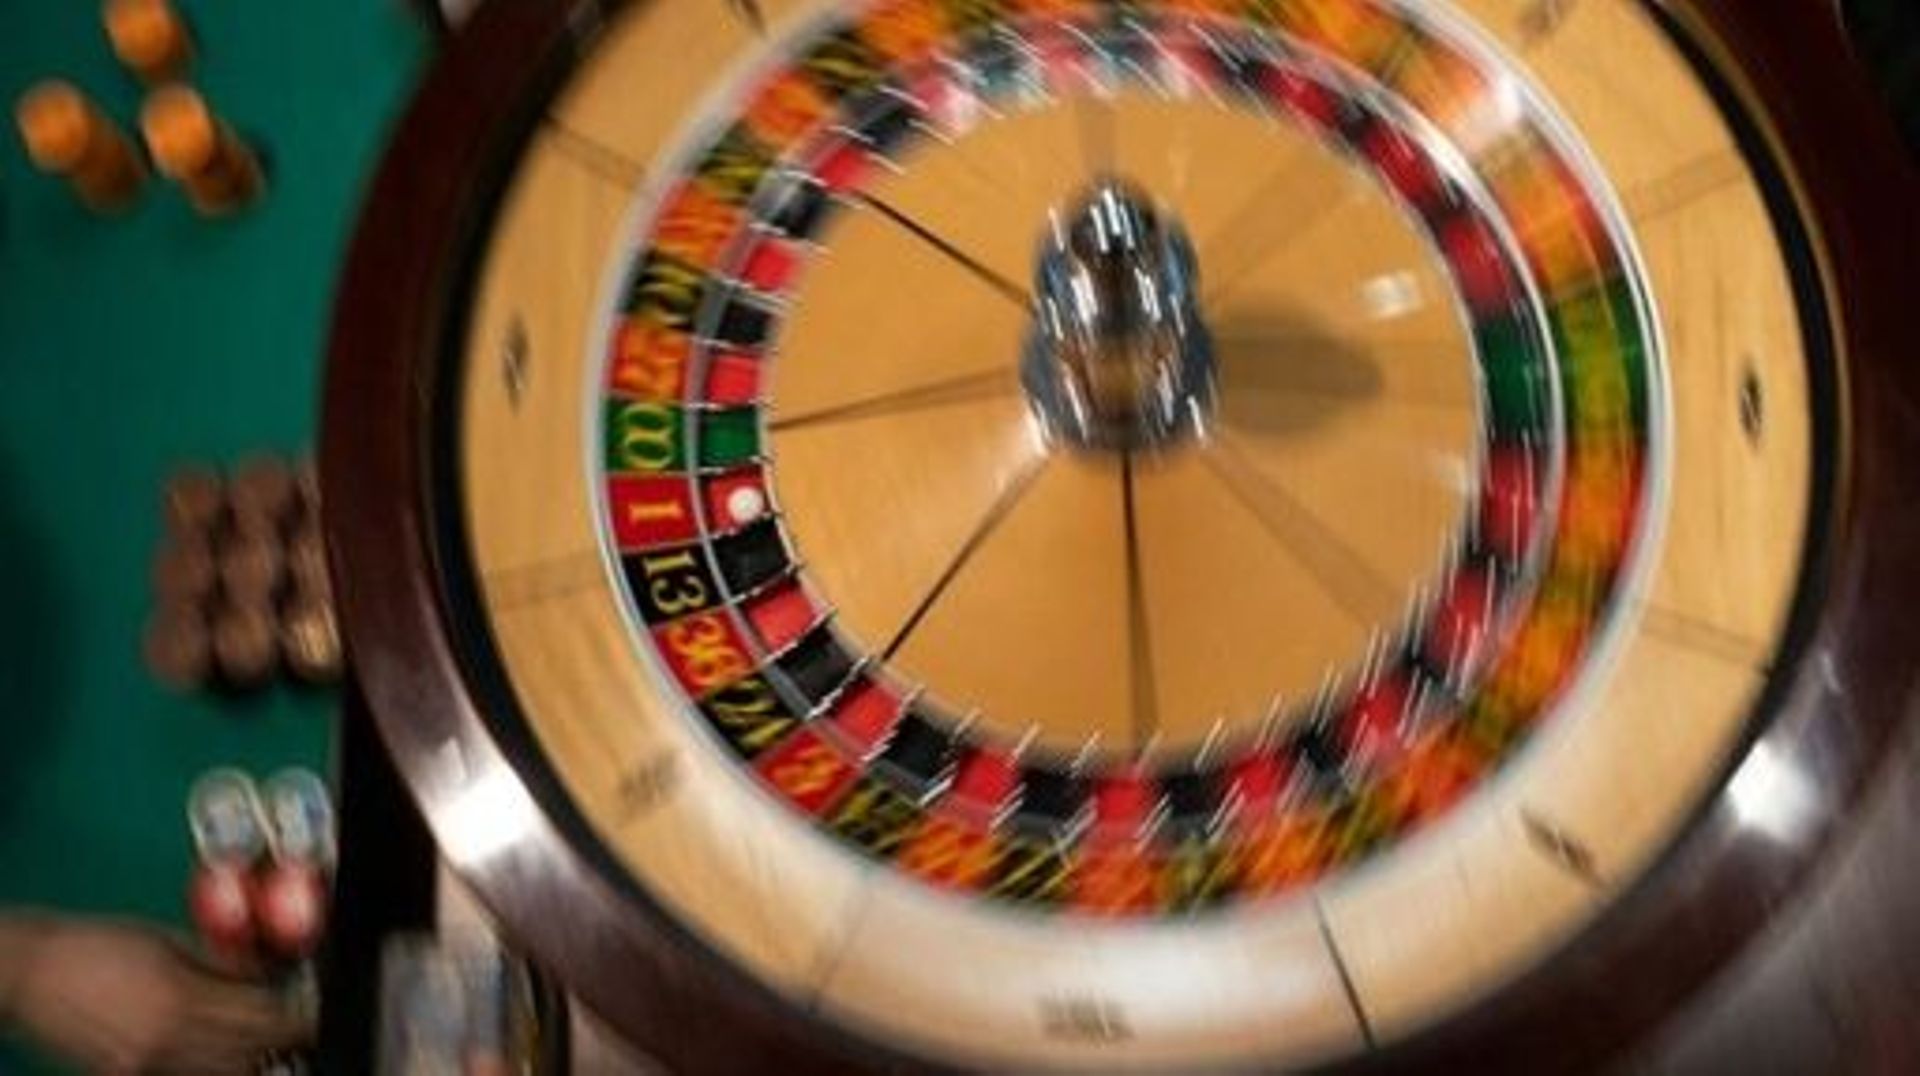 This picture taken on June 6, 2018 shows a roulette wheel at the Japan Casino School in Tokyo. Japan has long been viewed as the Holy Grail of gaming in Asia due to a wealthy population, proximity to China and appetite for other forms of legal gambling, i